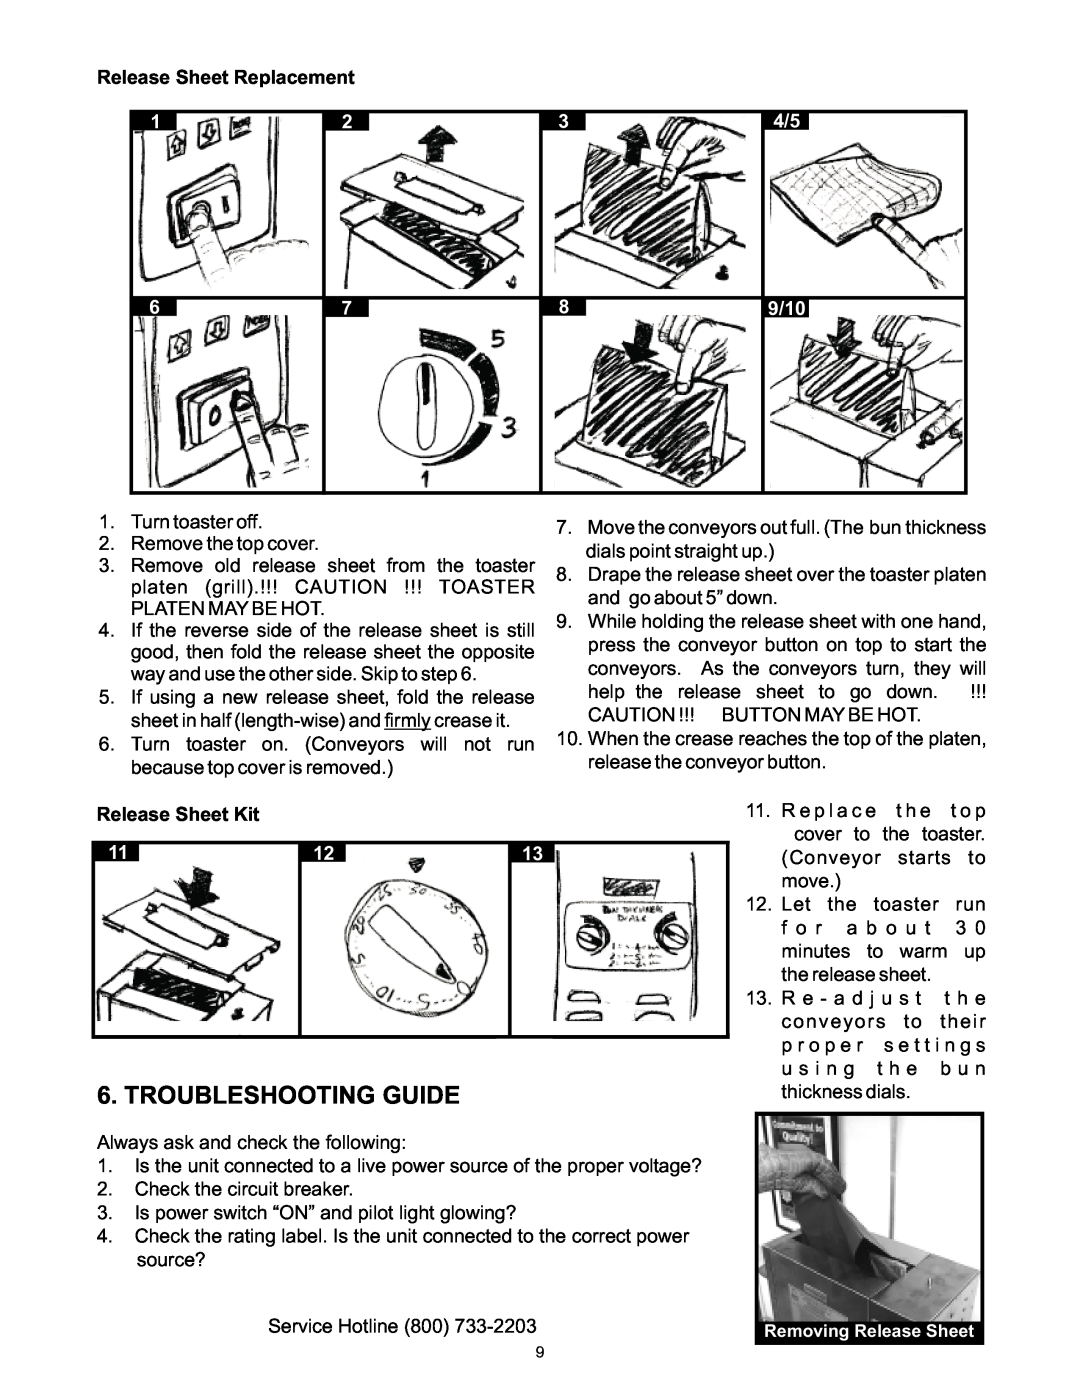 APW Wyott VCG operating instructions Troubleshooting Guide, Release Sheet Replacement, 9/10 